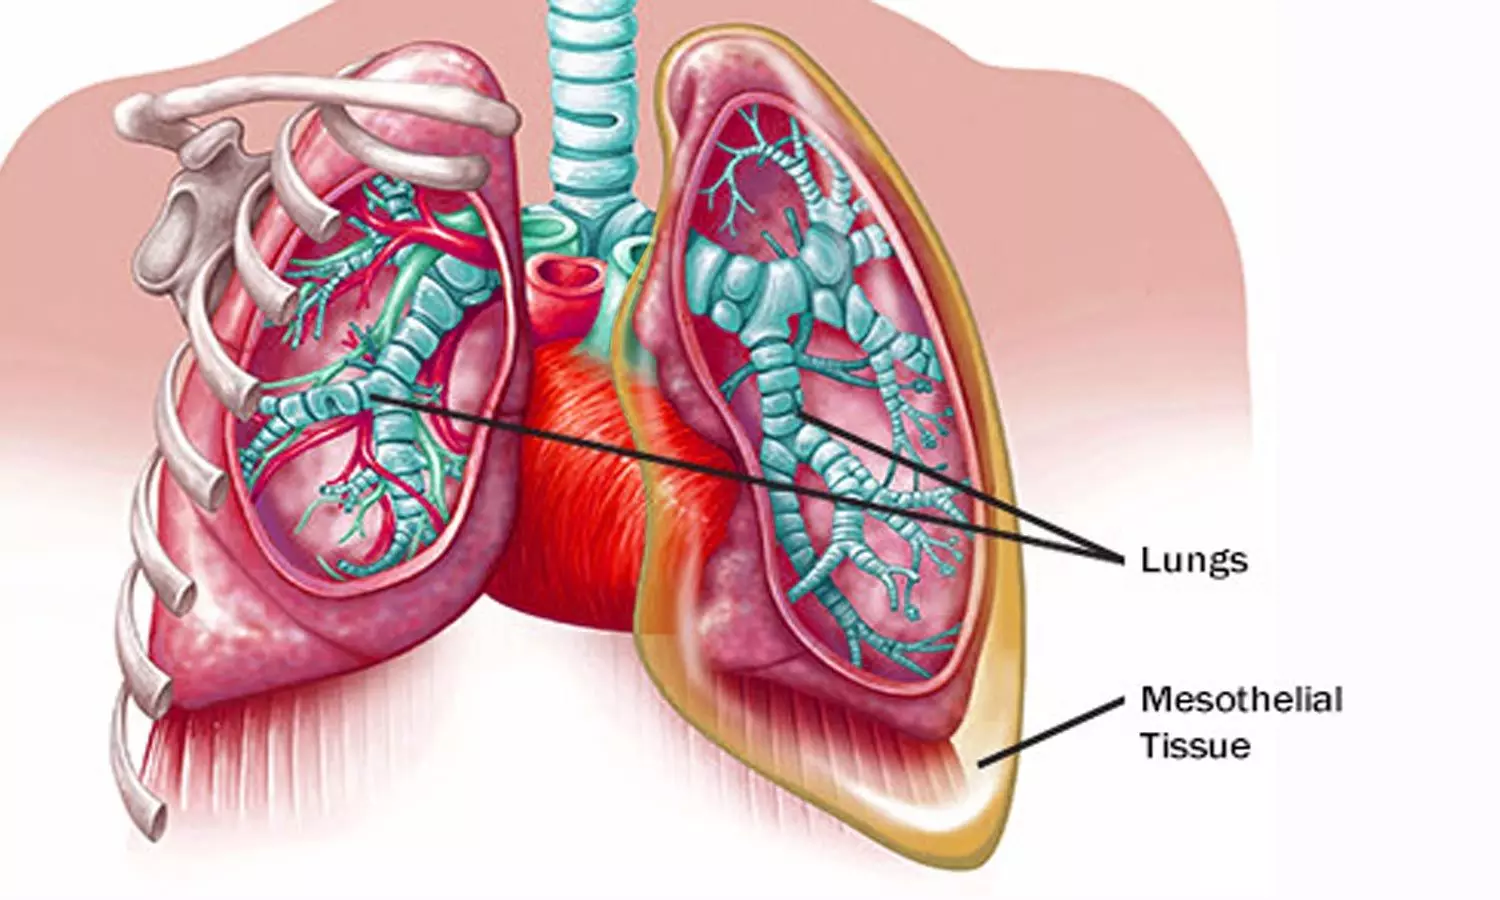 Symptoms and signs of Mesothelioma